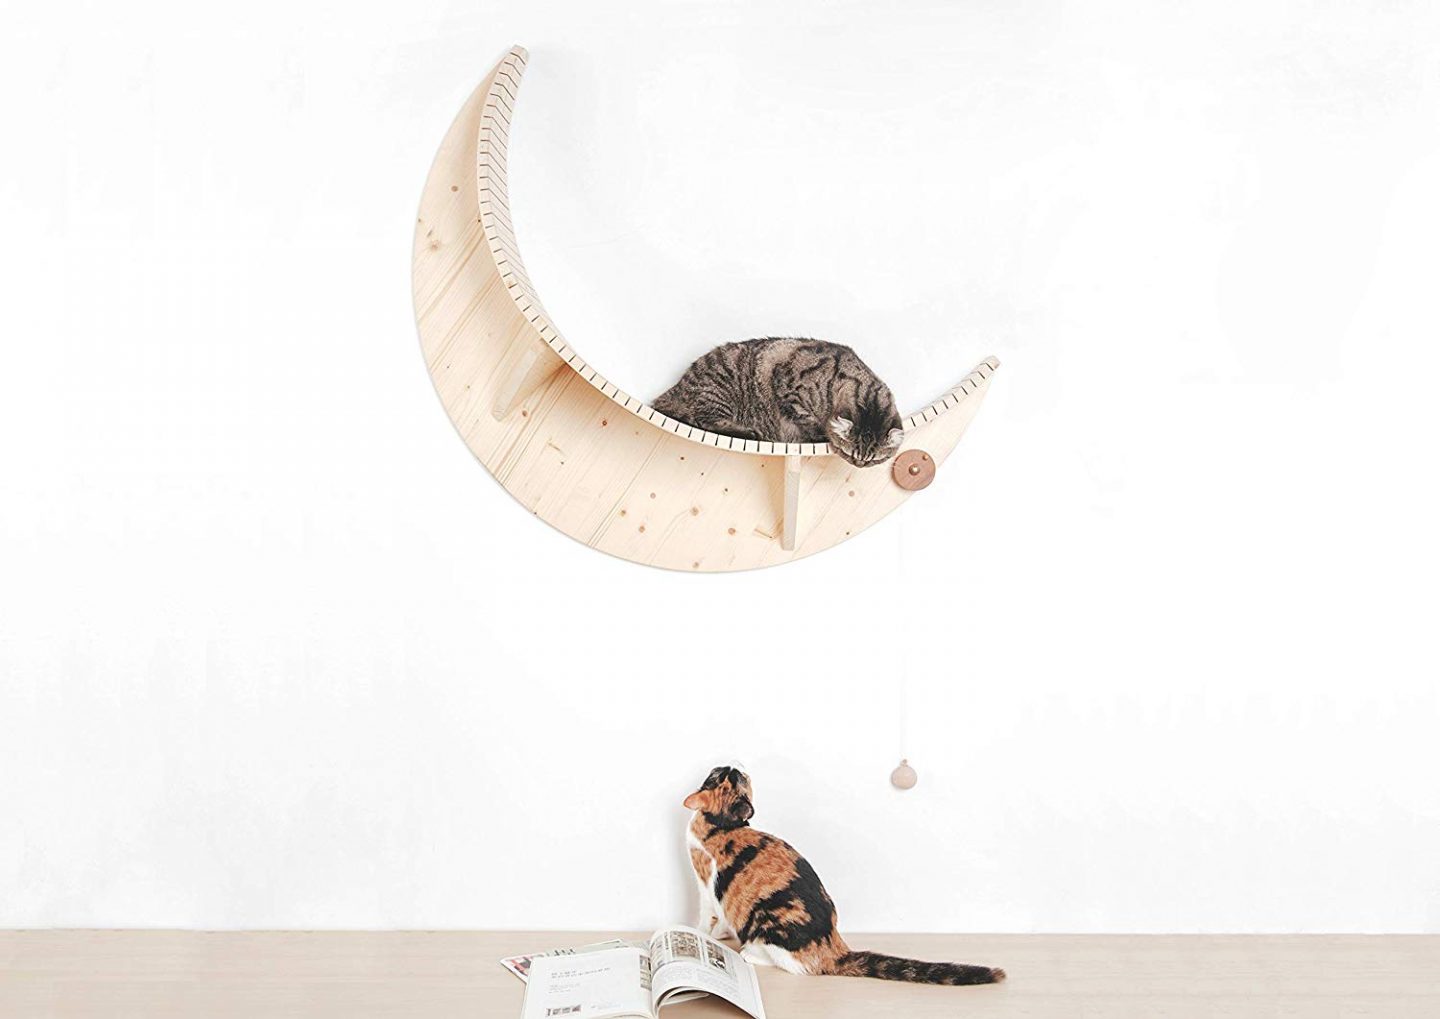 The Luna cat perch is a beautiful space themed cat perch in the shape of a crescent moon, made from solid wood and sure to go well with modern, contemporary or minimalist decor.